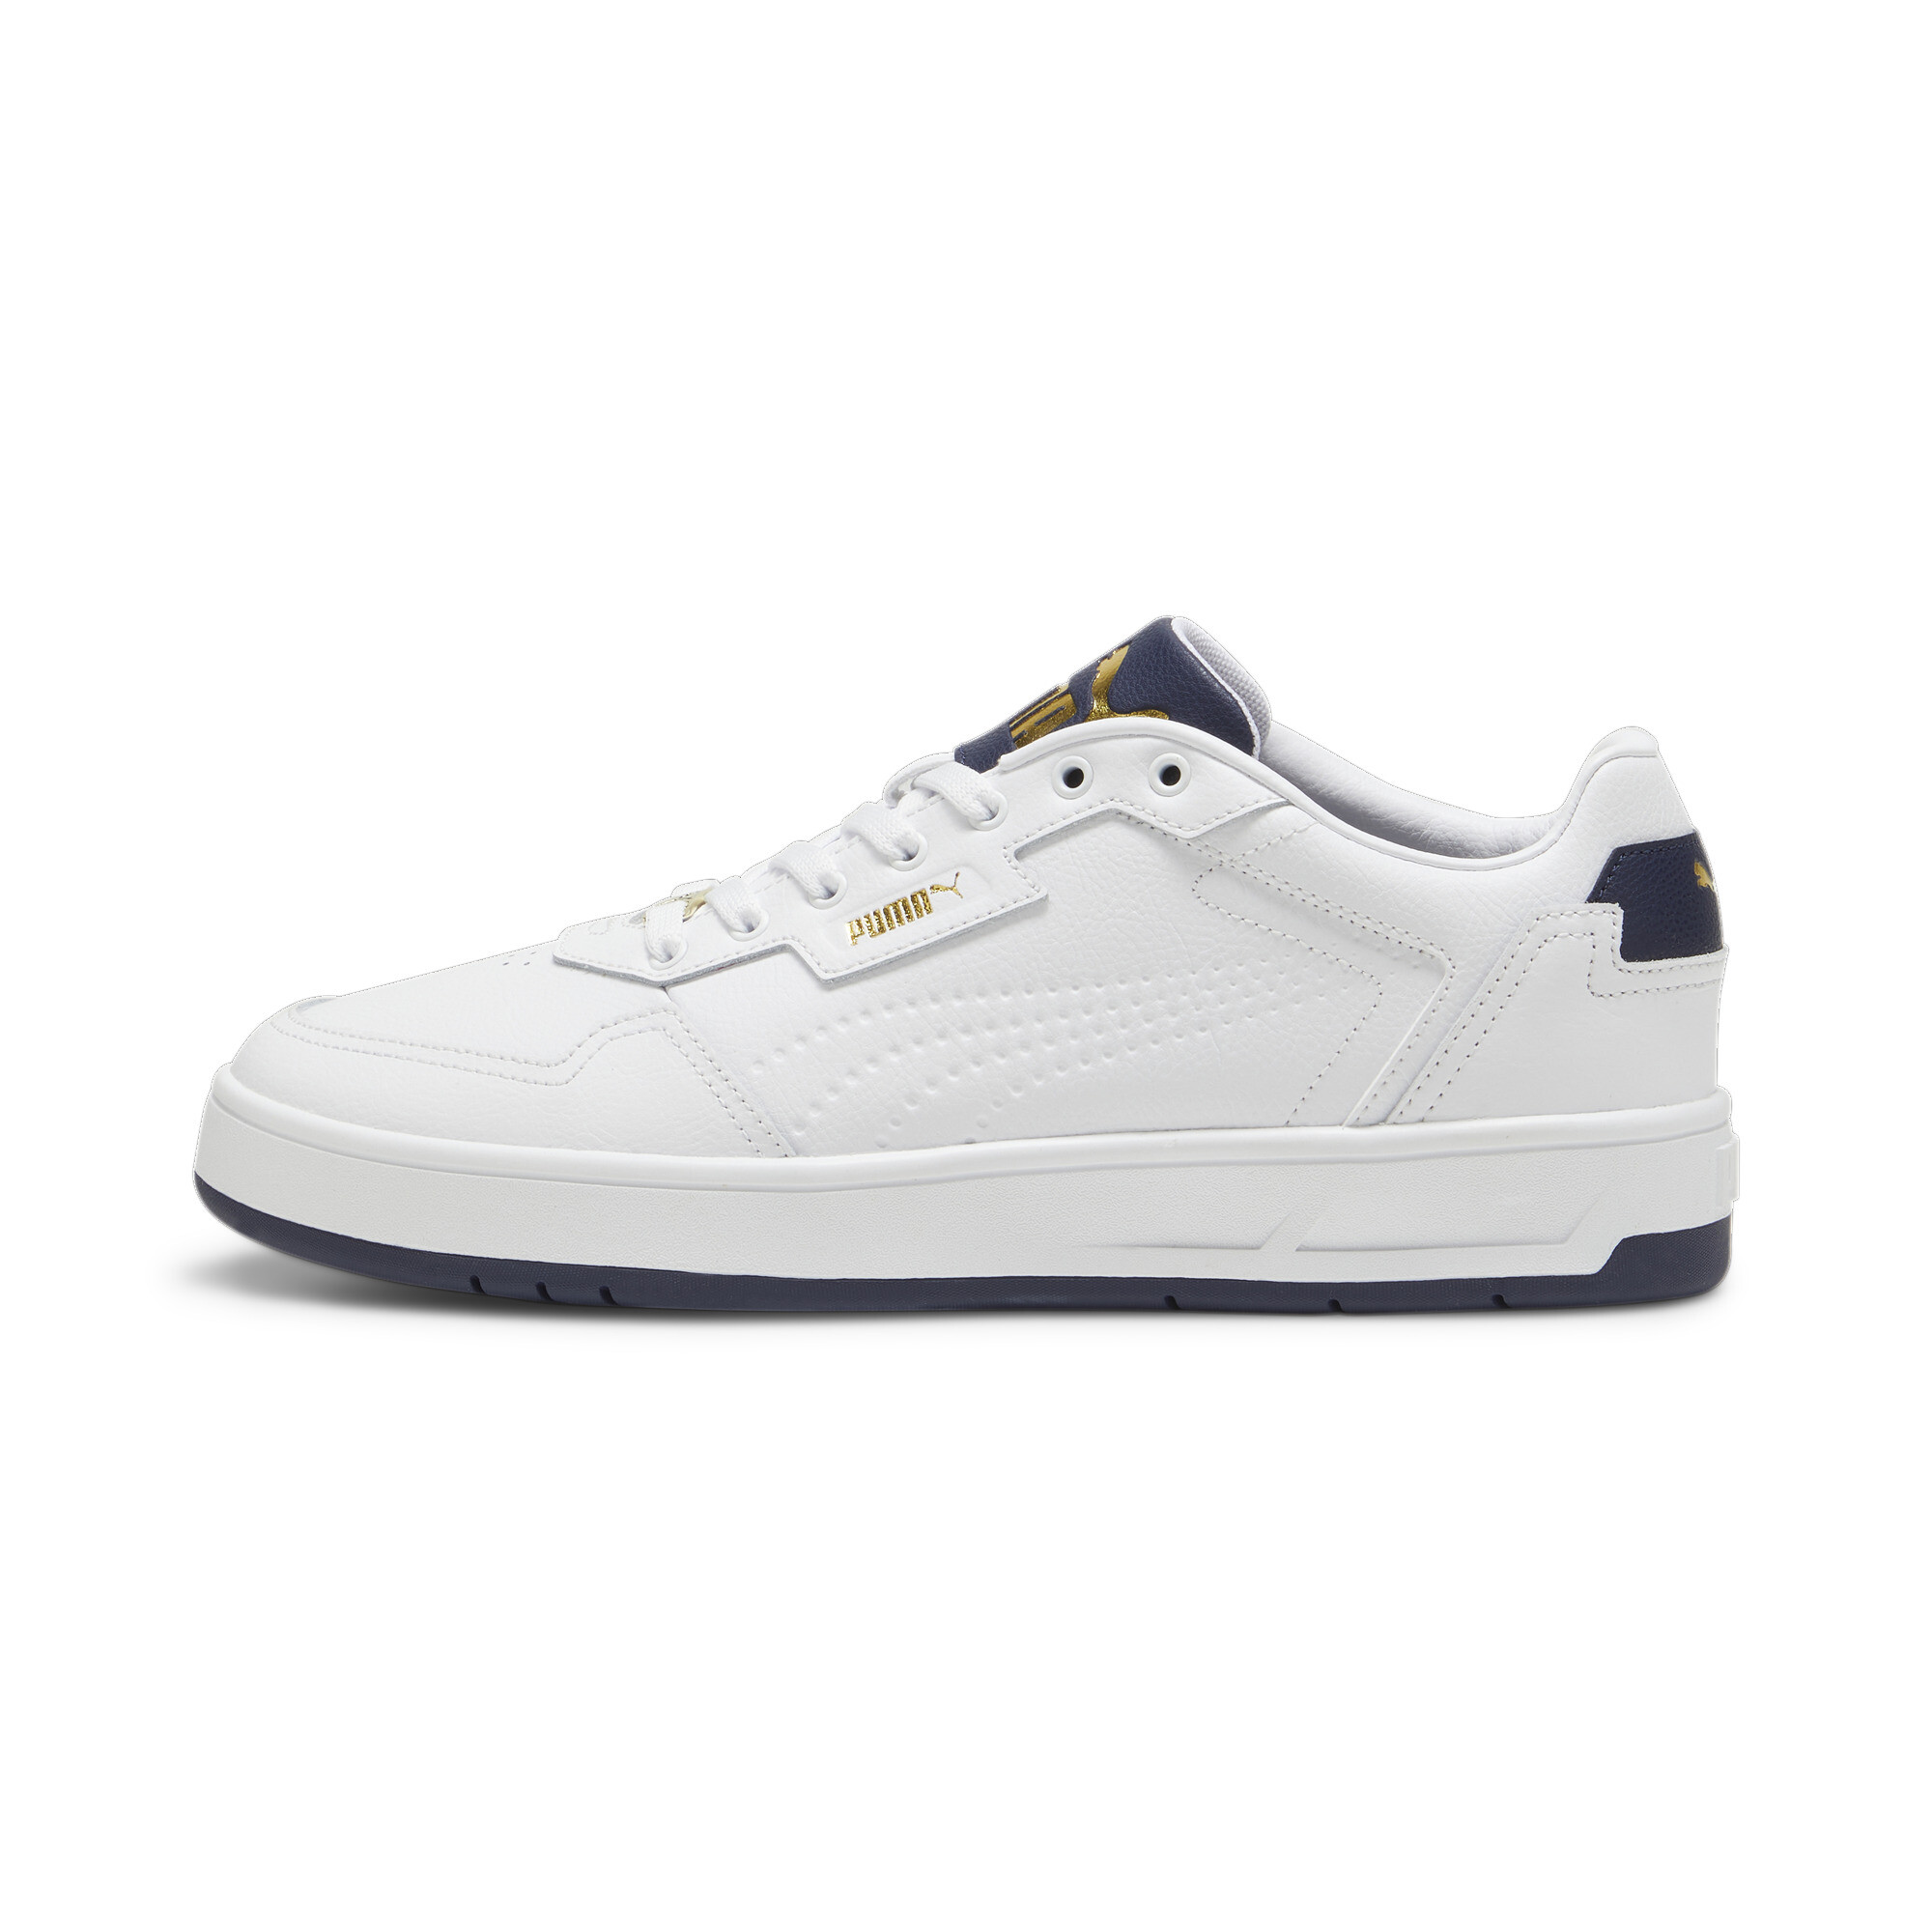 Puma Court Classic Lux Sneakers, White, Size 42, Shoes